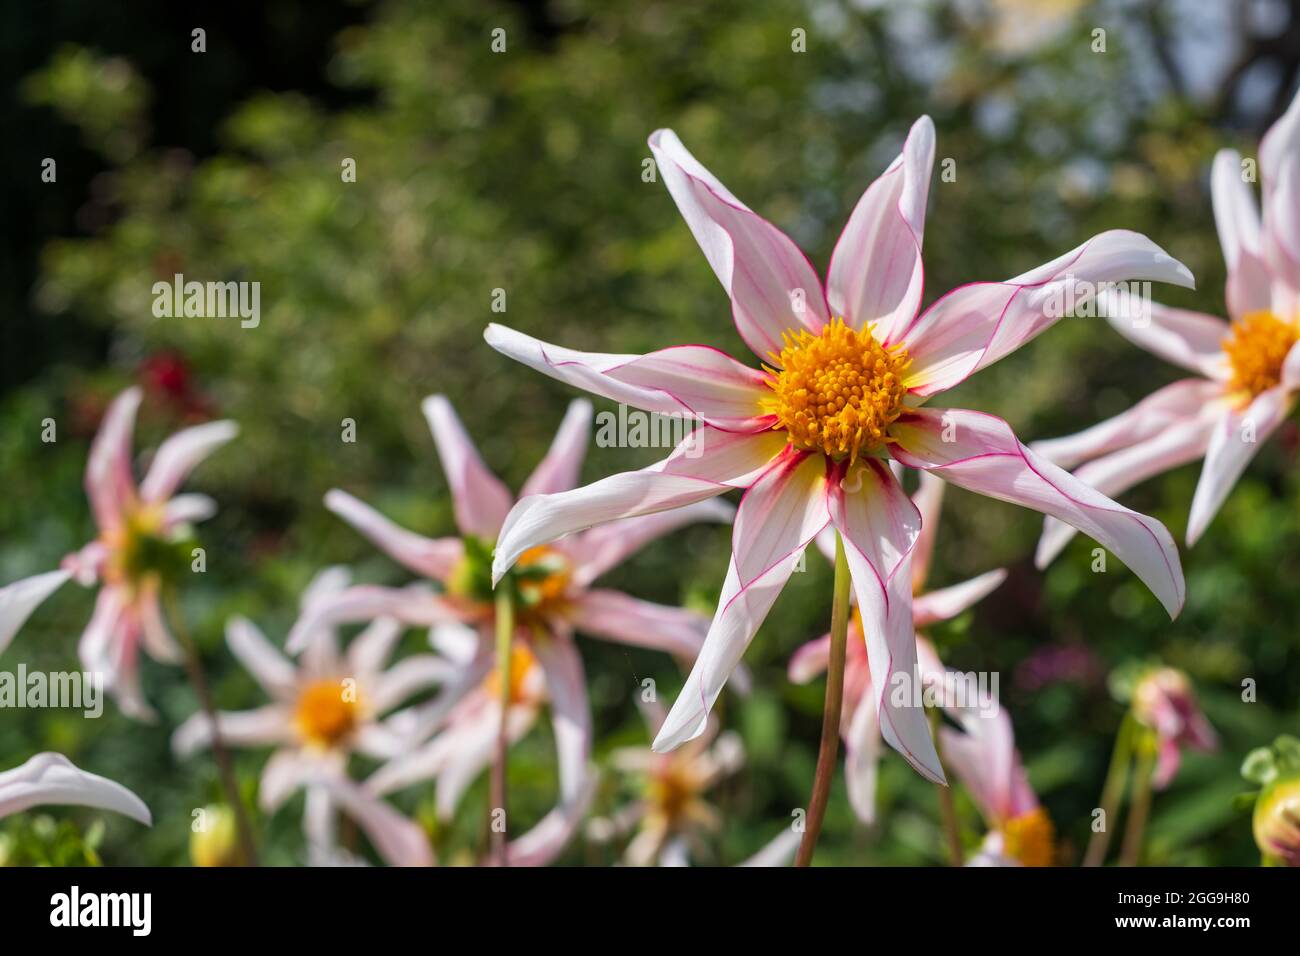 Unusual star shaped flowers, Dahlia Honka Fragile, growing at Bourton House Garden, Bourton-on-the-Hill in the Cotswolds, Gloucestershire, UK. Stock Photo